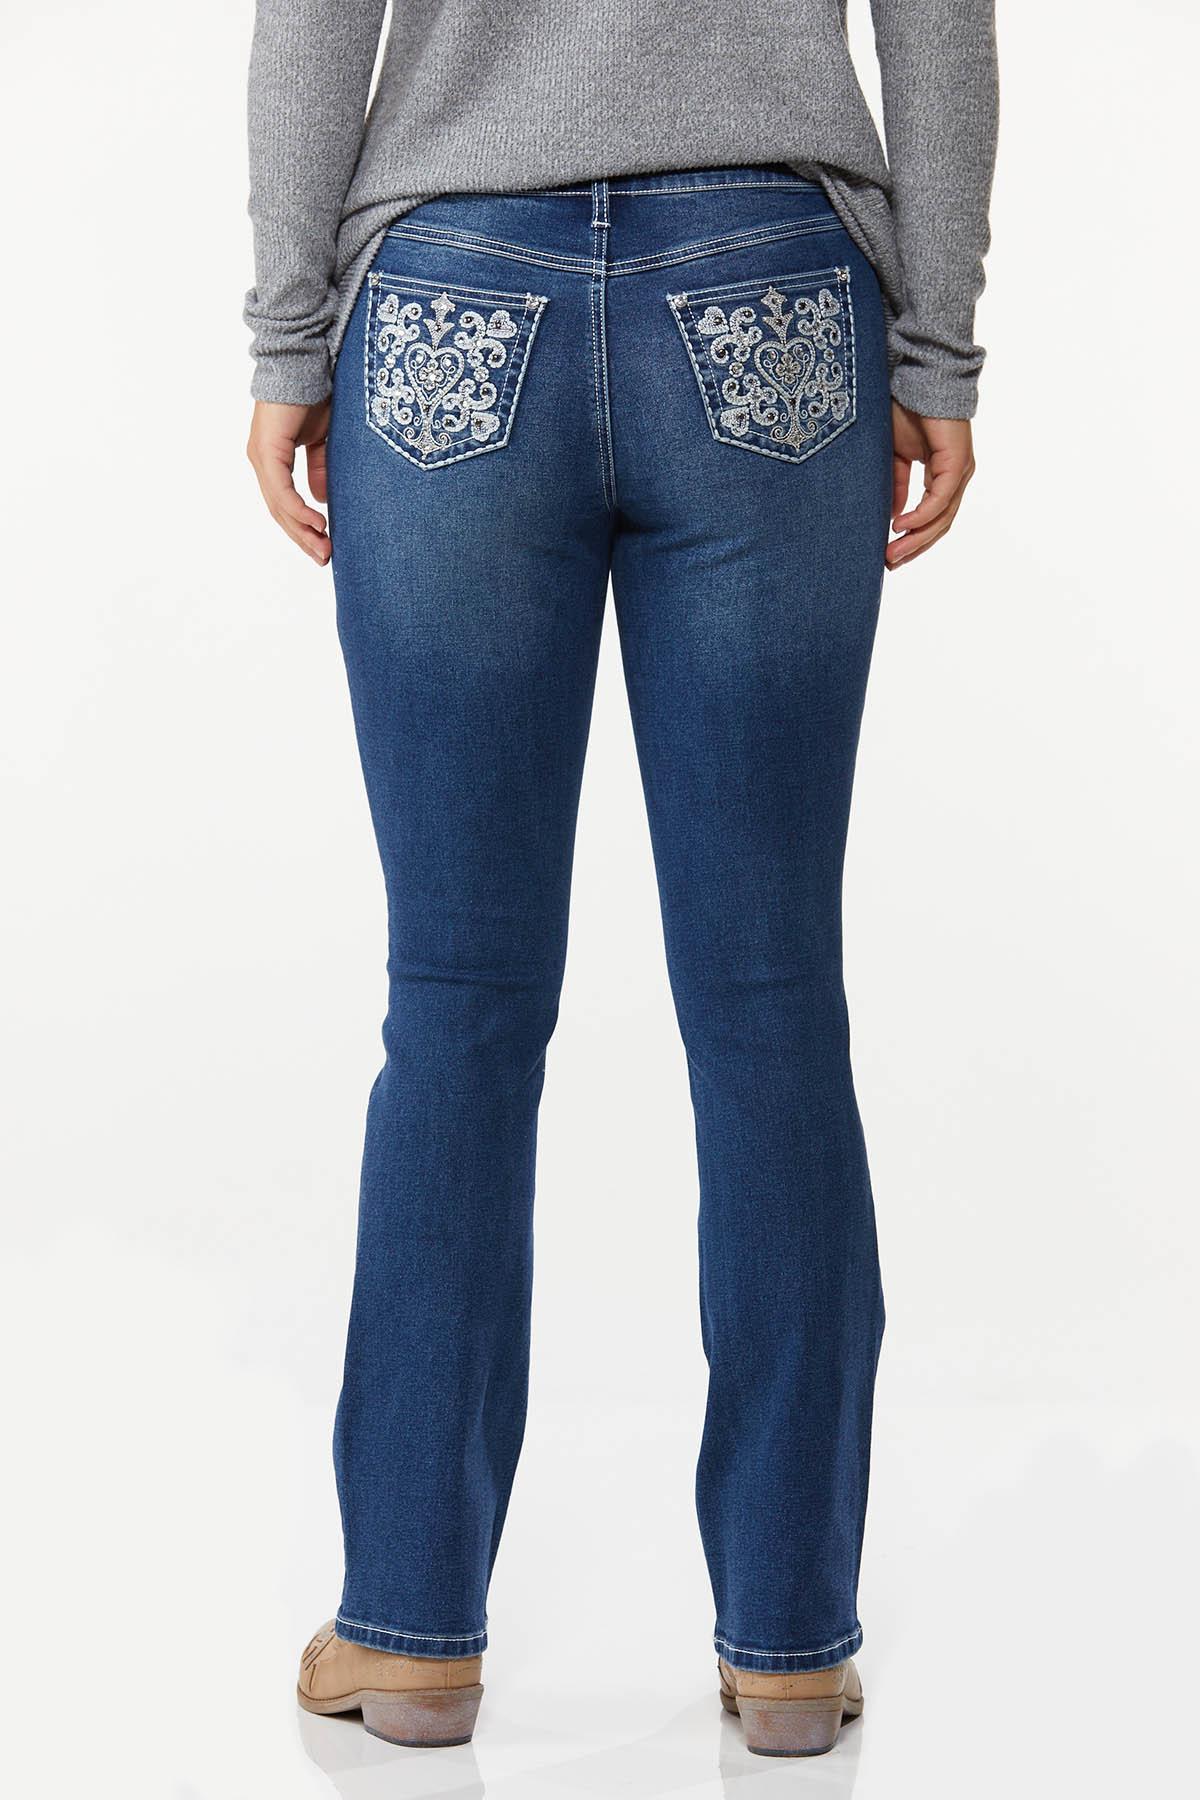 Petite Heart Embroidered Jeans